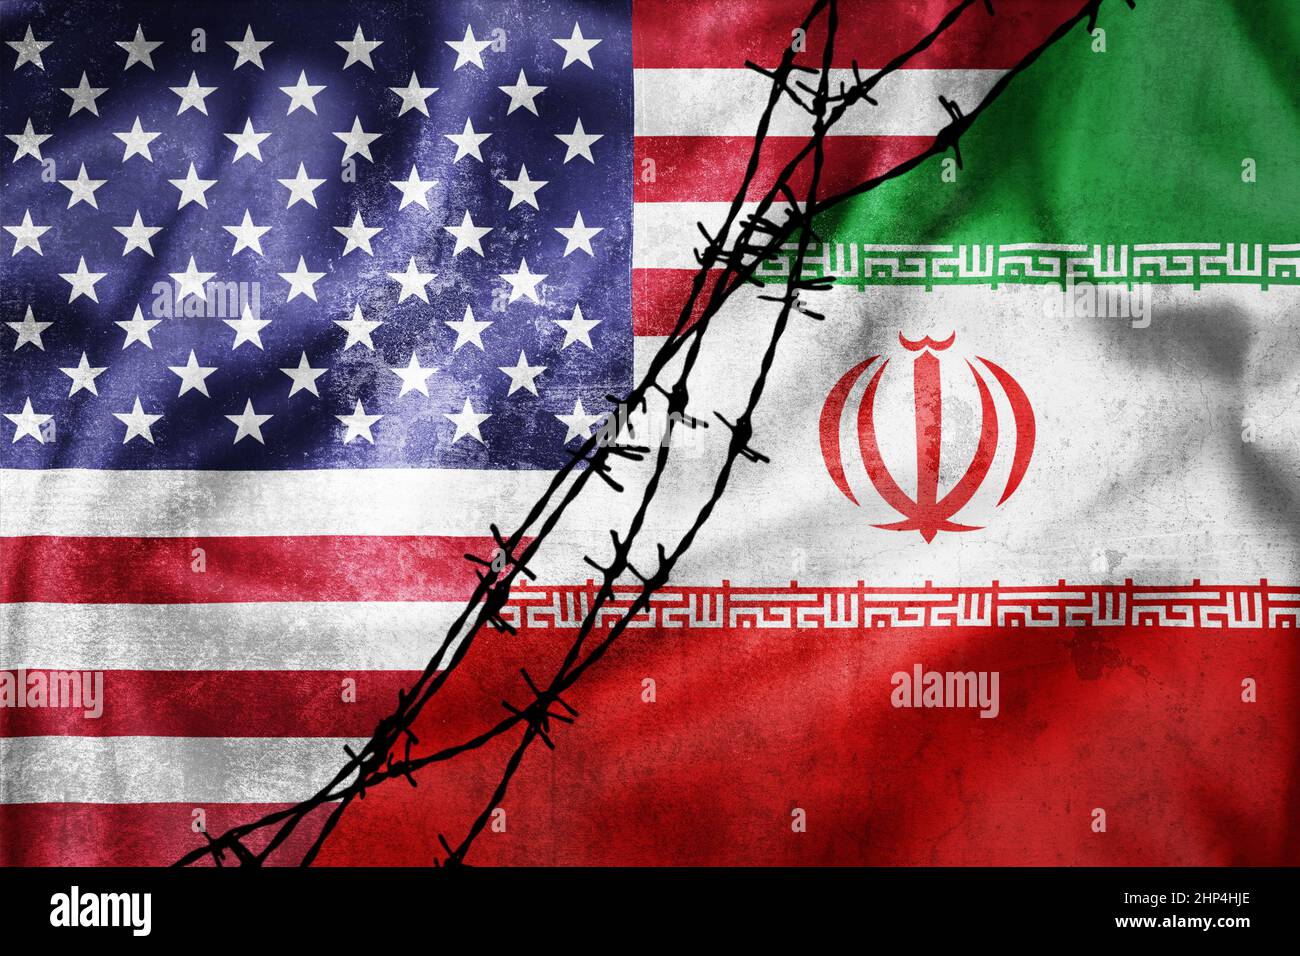 Grunge flags of Iran and USA divided by barb wire illustration, concept of tense relations between Iran and the USA Stock Photo